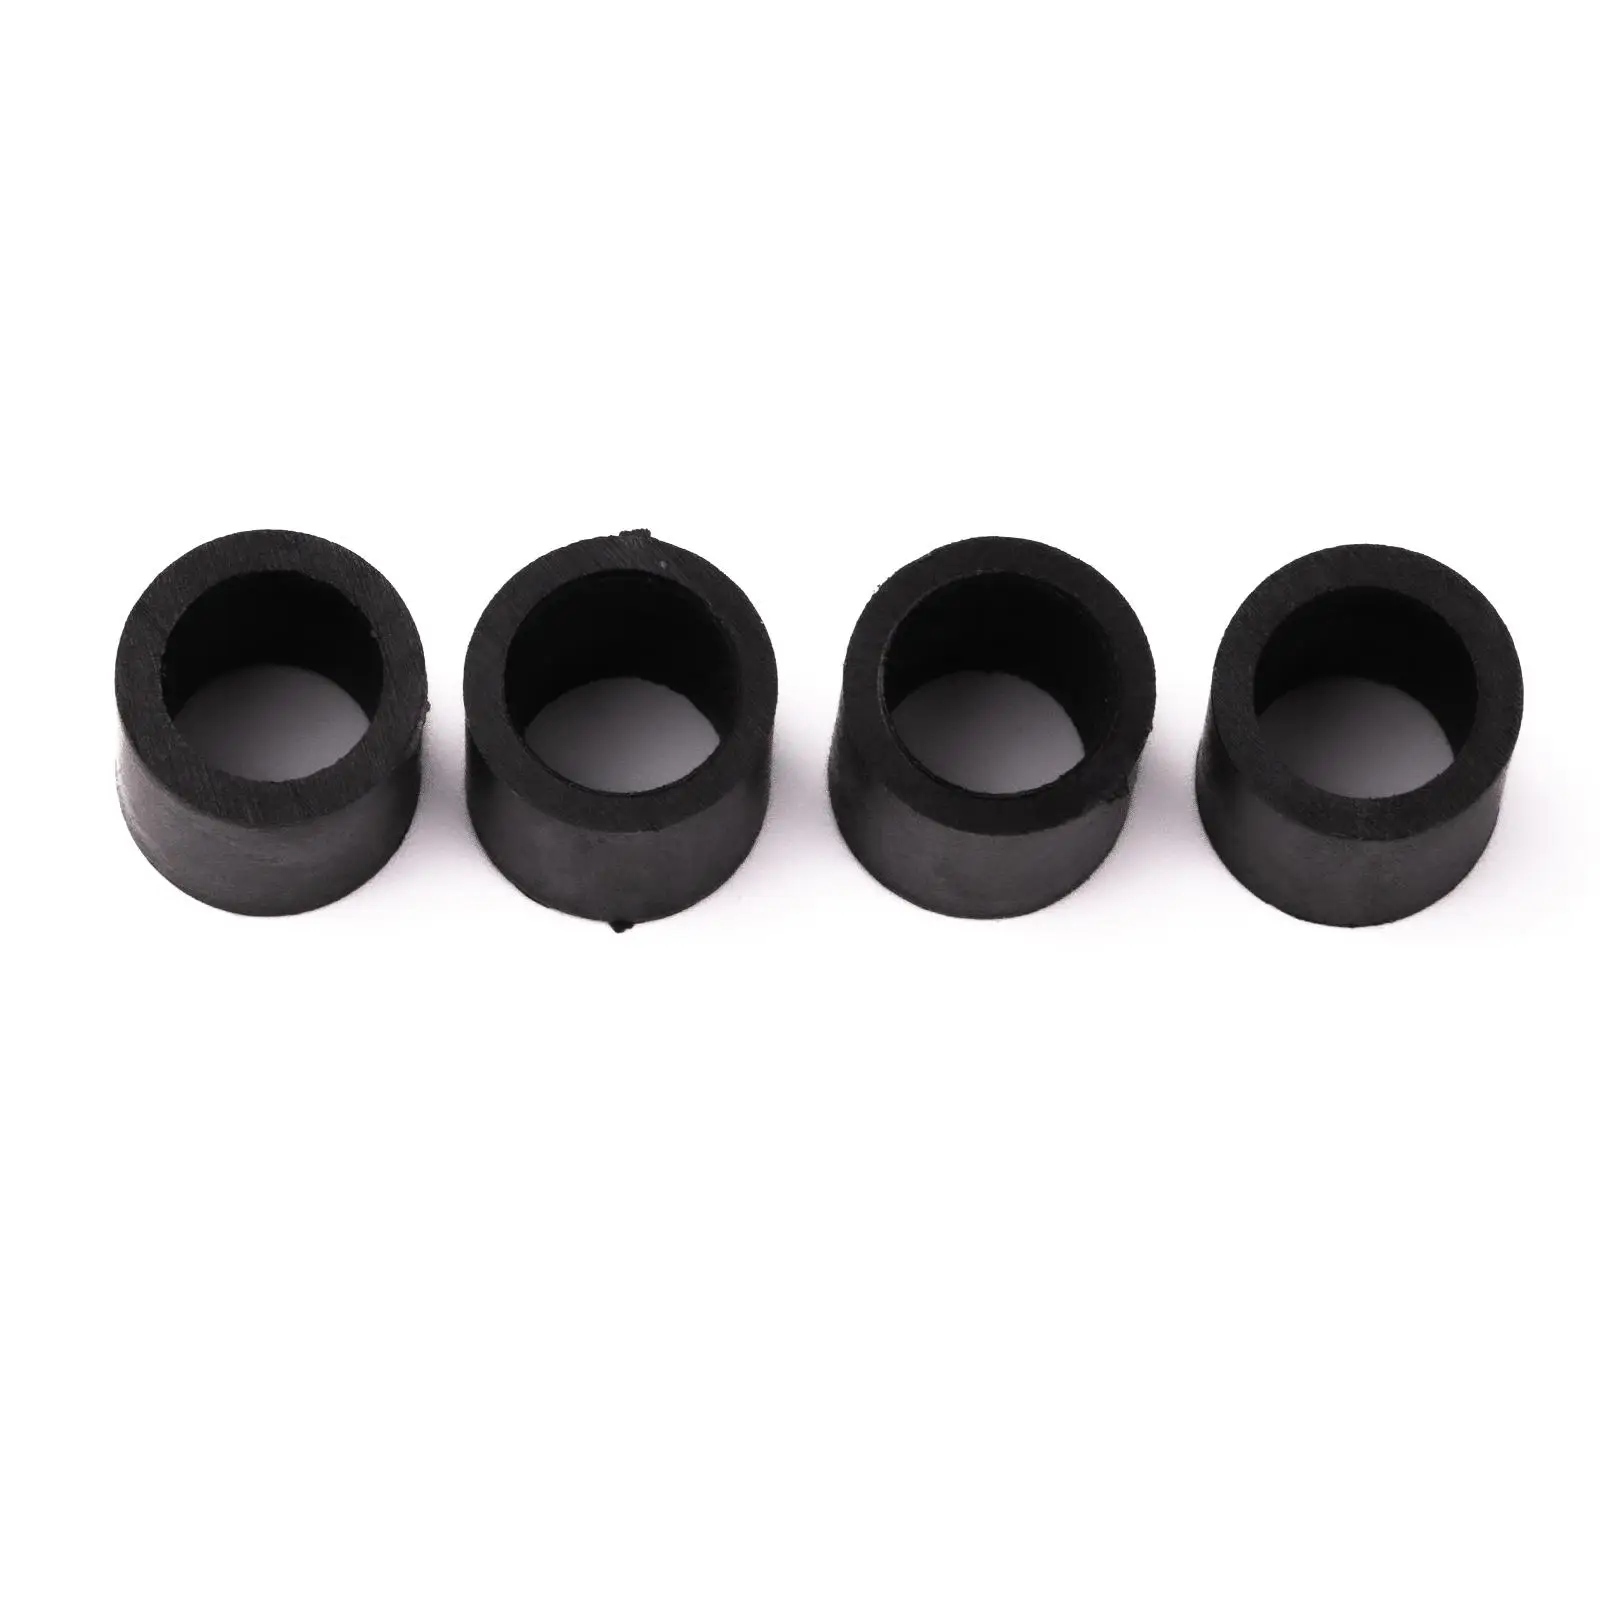 4x Replacement for Cricut Maker Easy Installation Durable for Cricut Roller Repair Rubber Roller/Wheel Rubber Roller Accessory